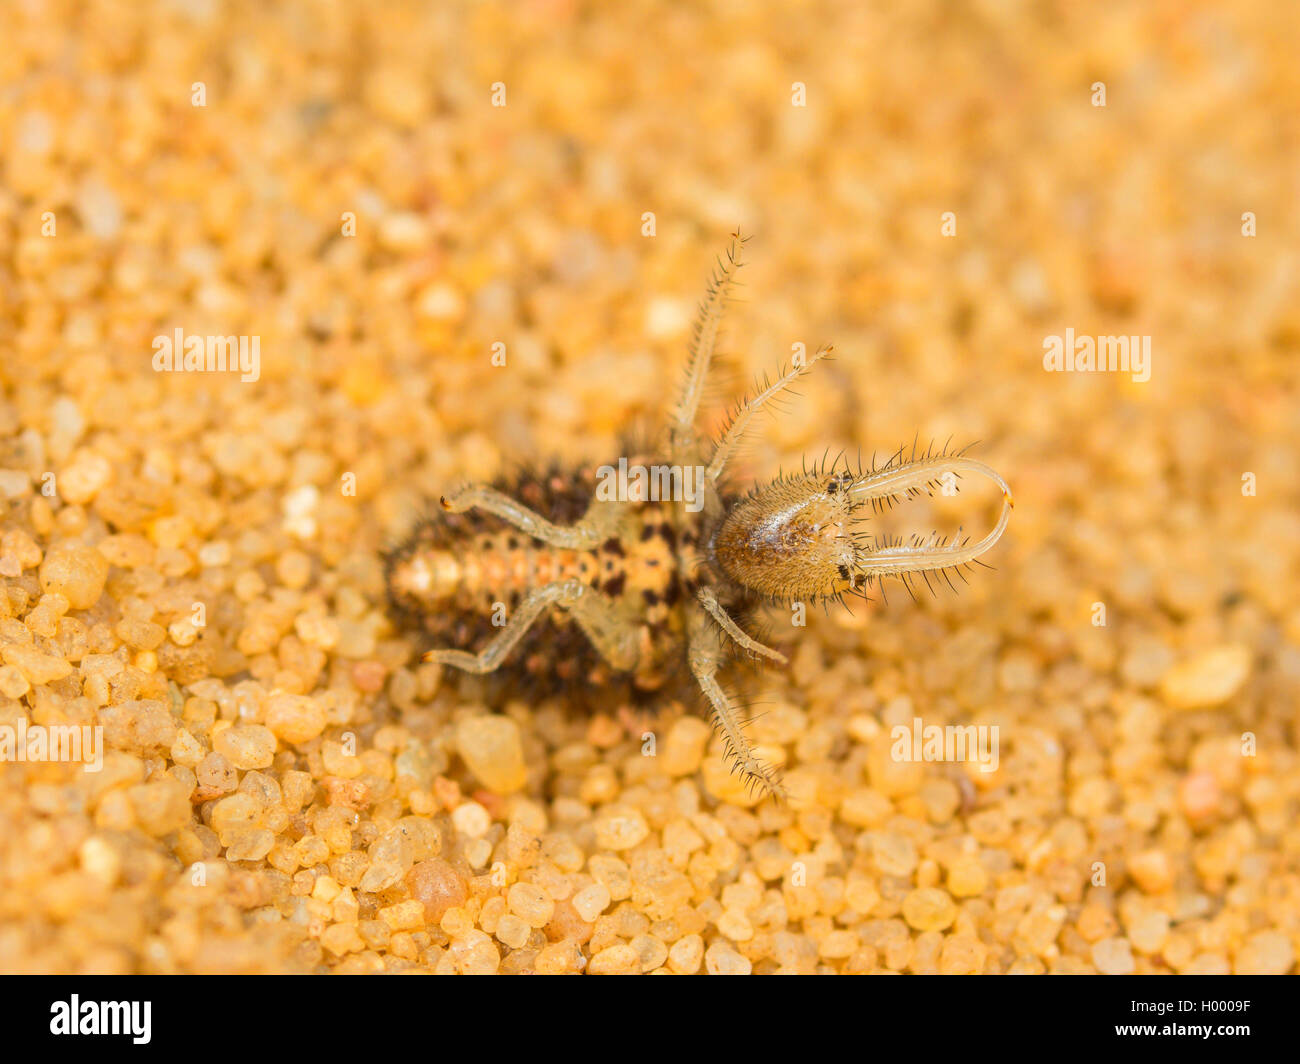 European antlion (Euroleon nostras), Young larva laying on back side, Germany Stock Photo